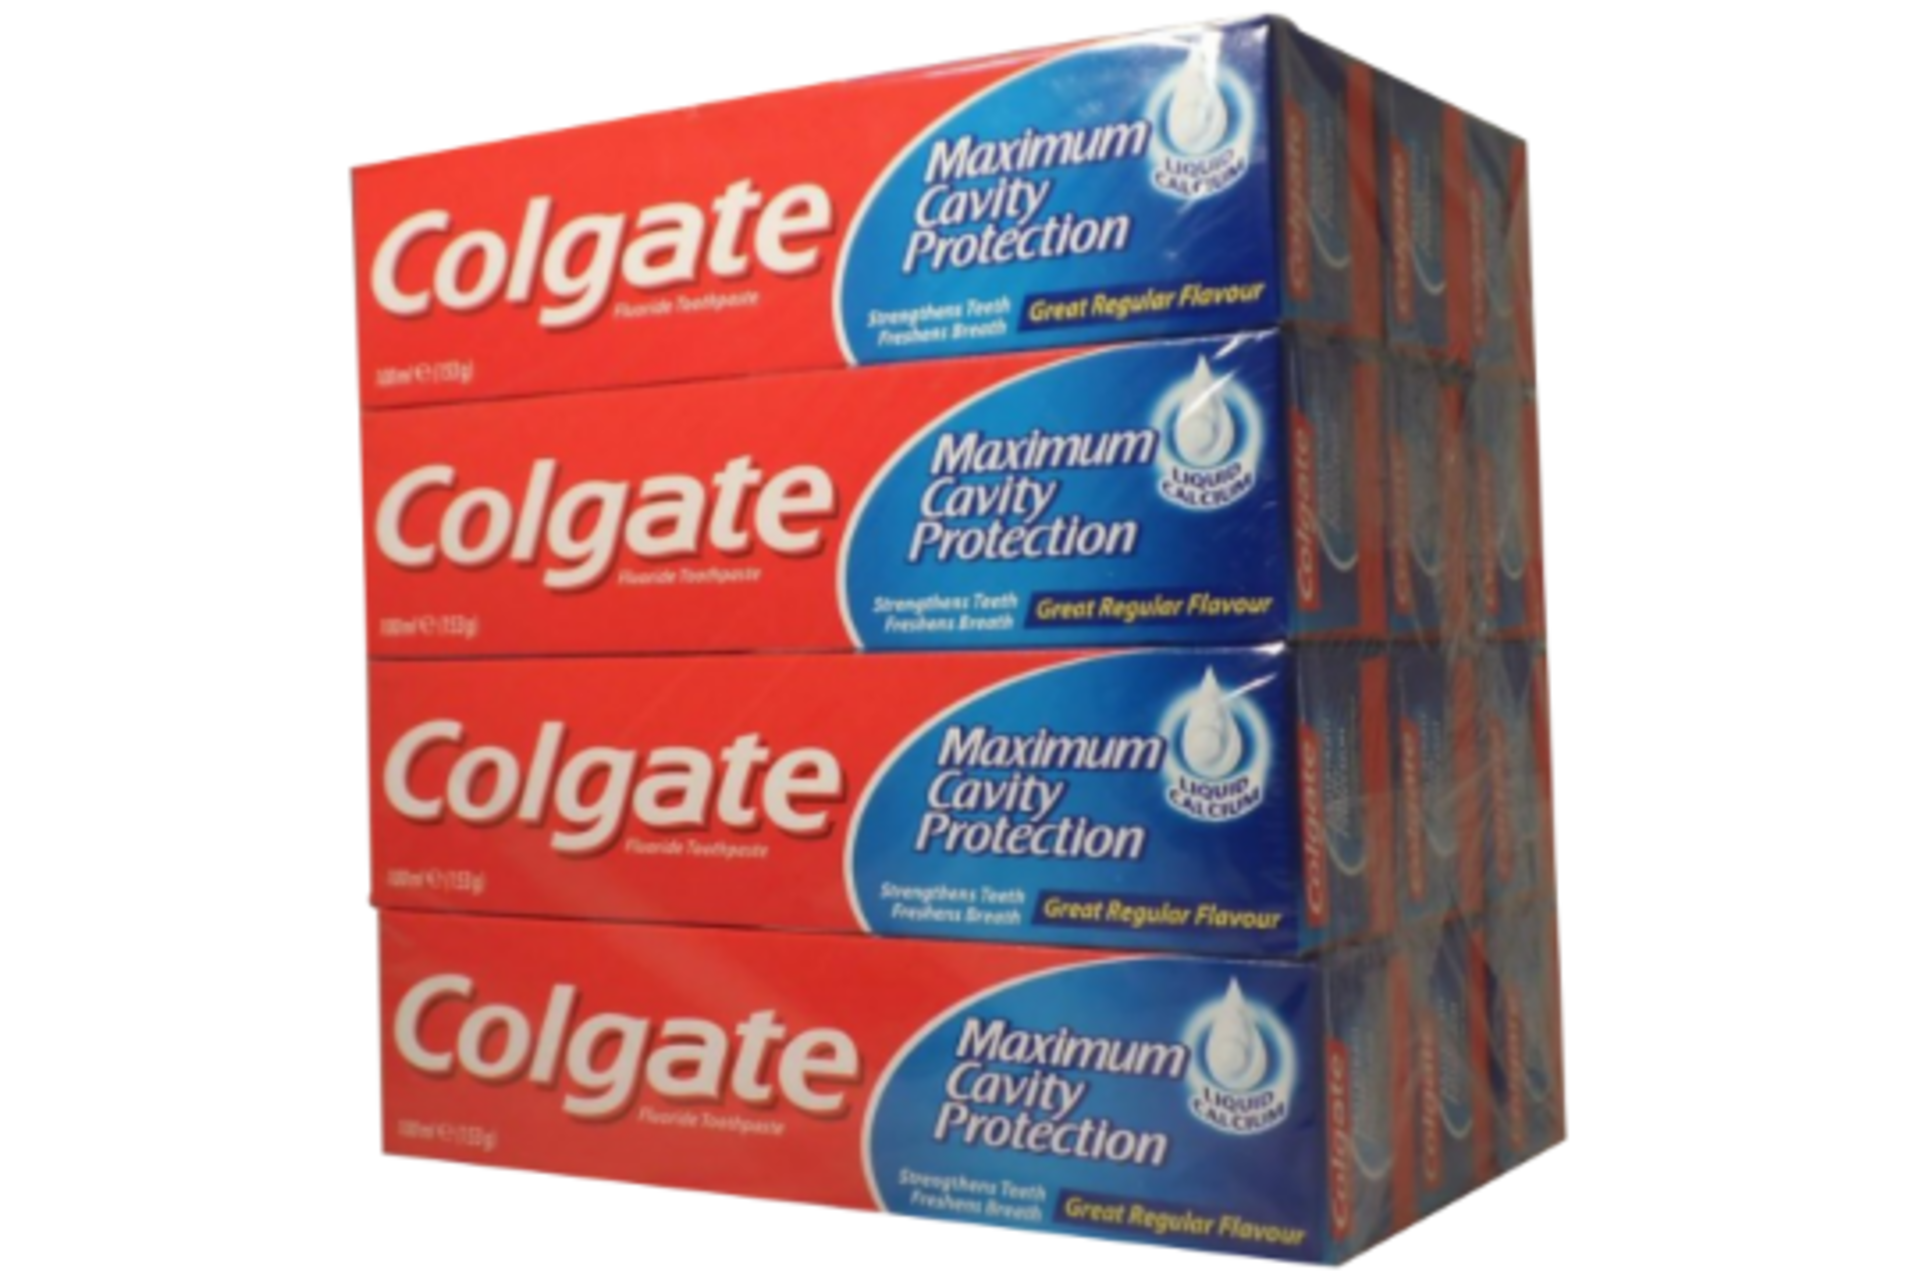 BRAND NEW PACK OF 12 100ML COLGATE TOOTHPASTE